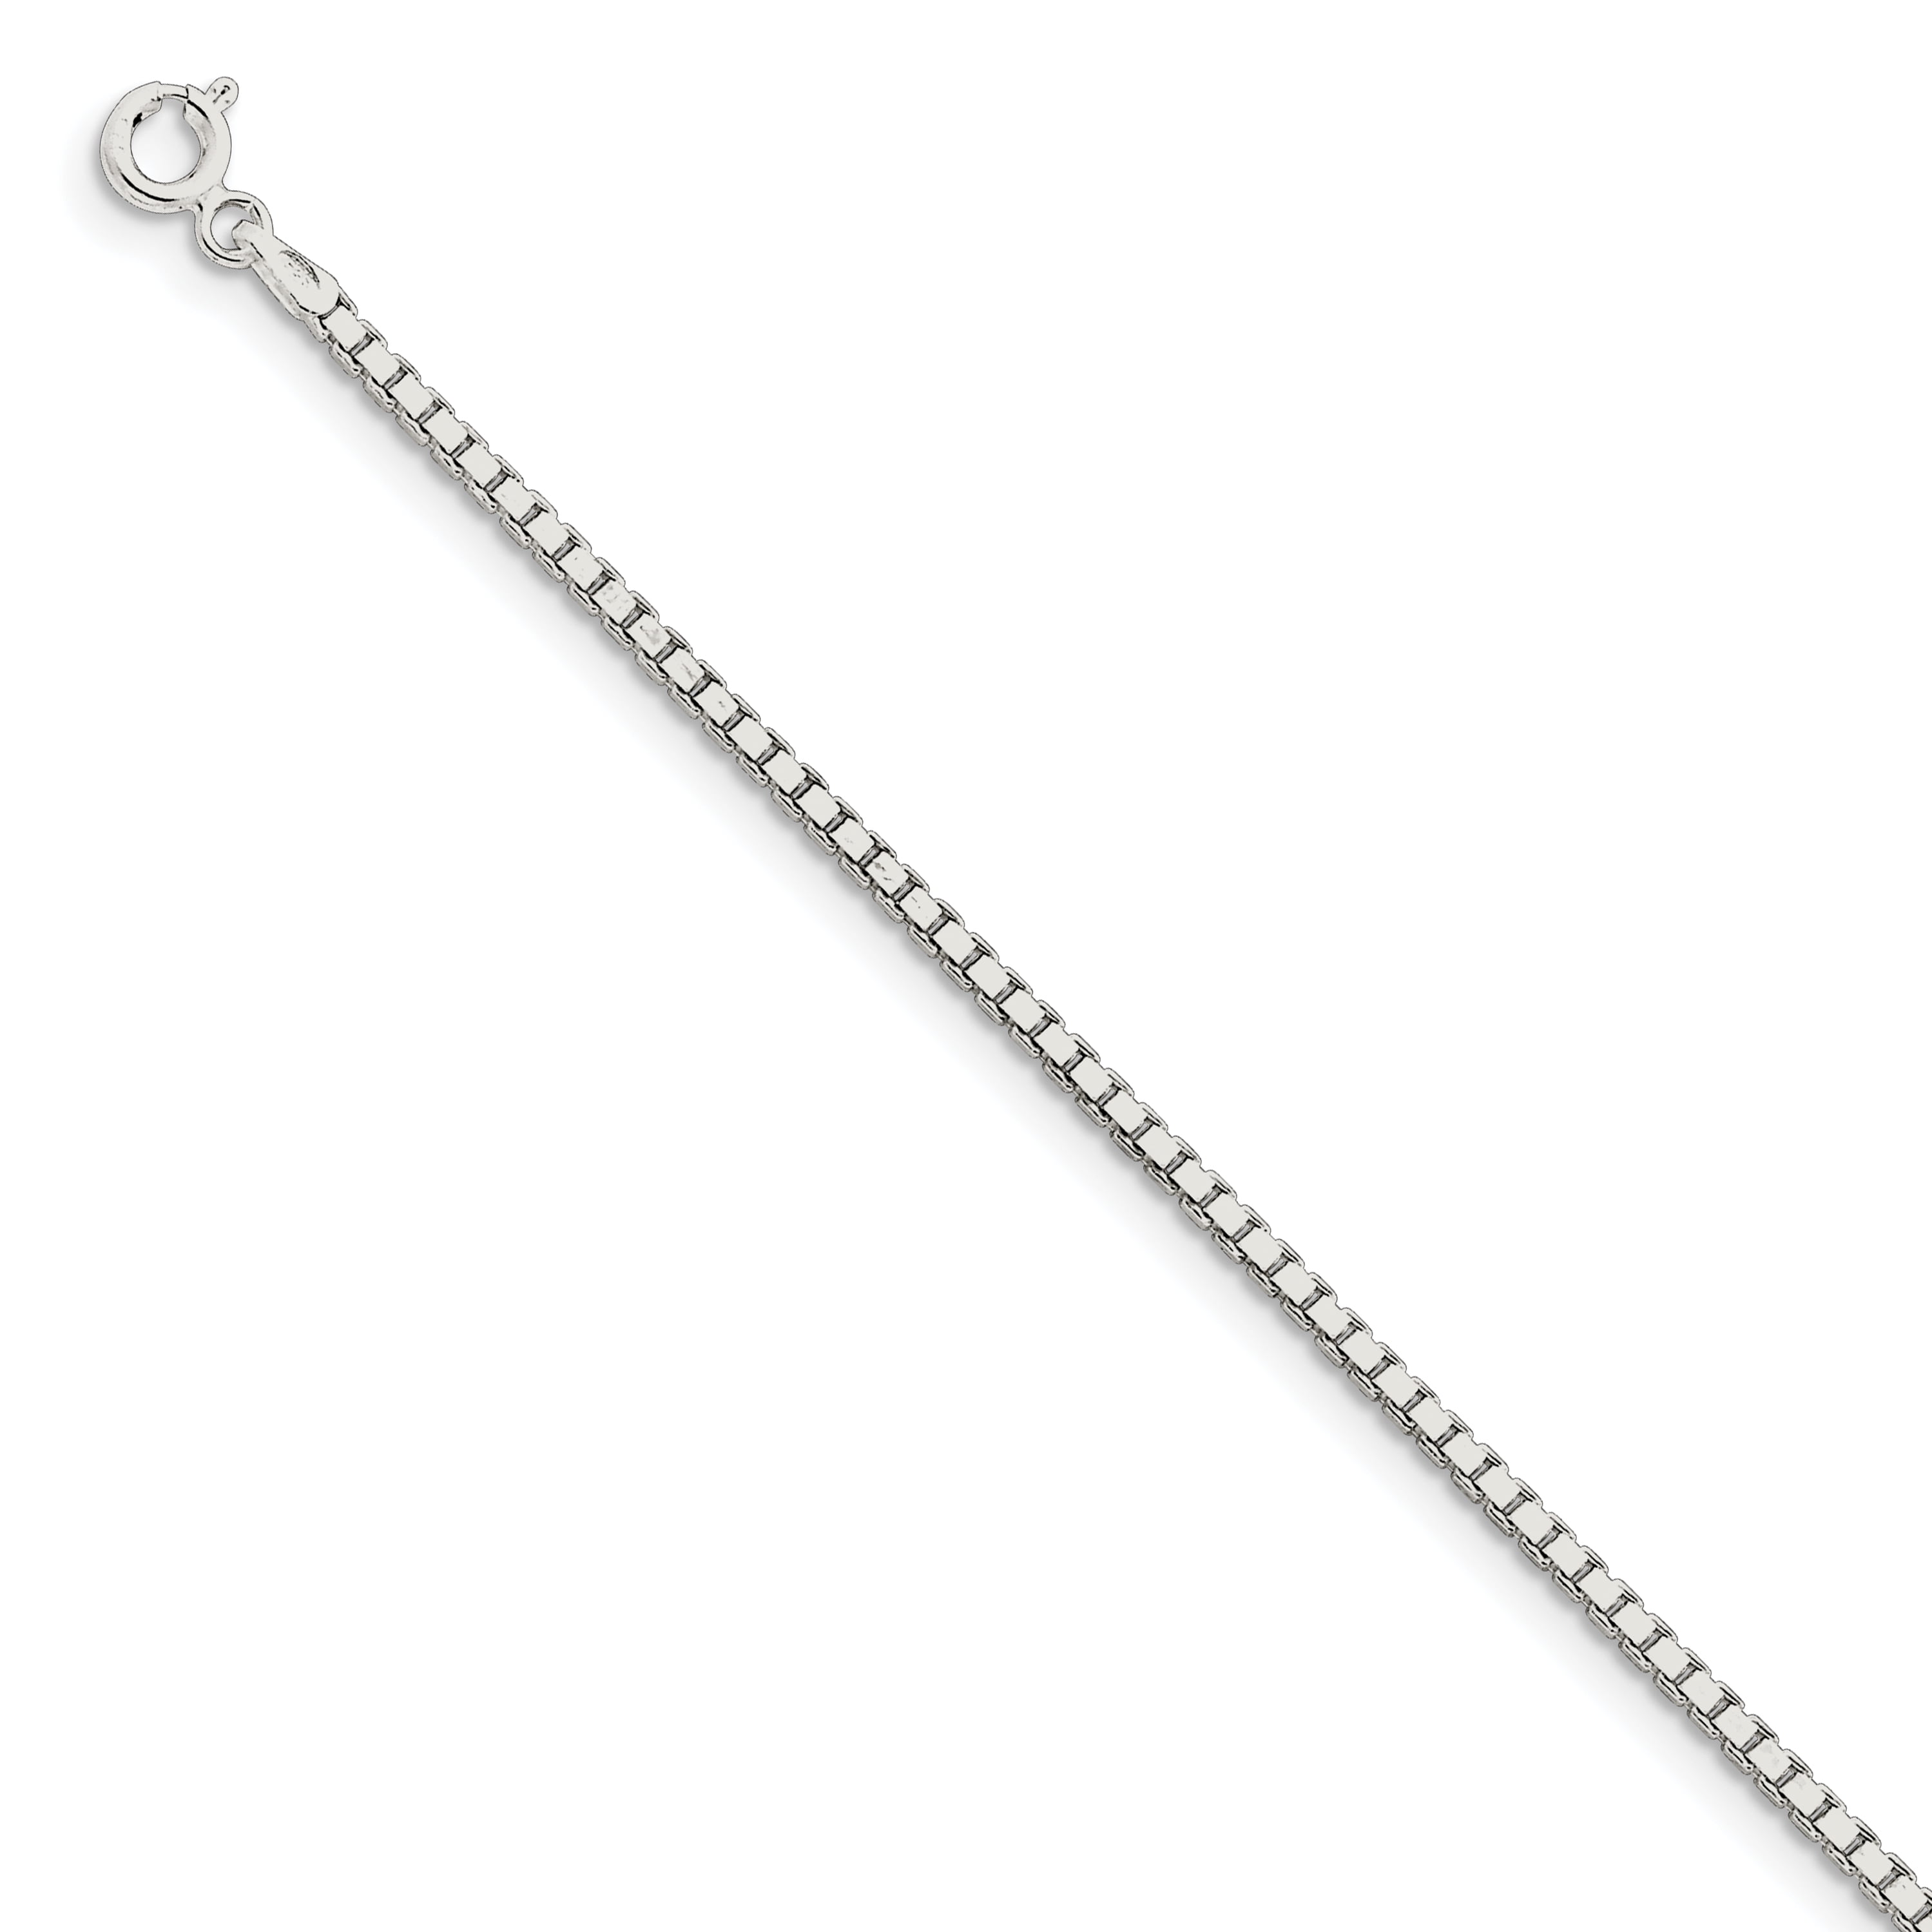 ANKLET 925 Sterling Silver 1.9mm Pop-Corn Chain NEW 7,8,9,10,11 inches BRACELET